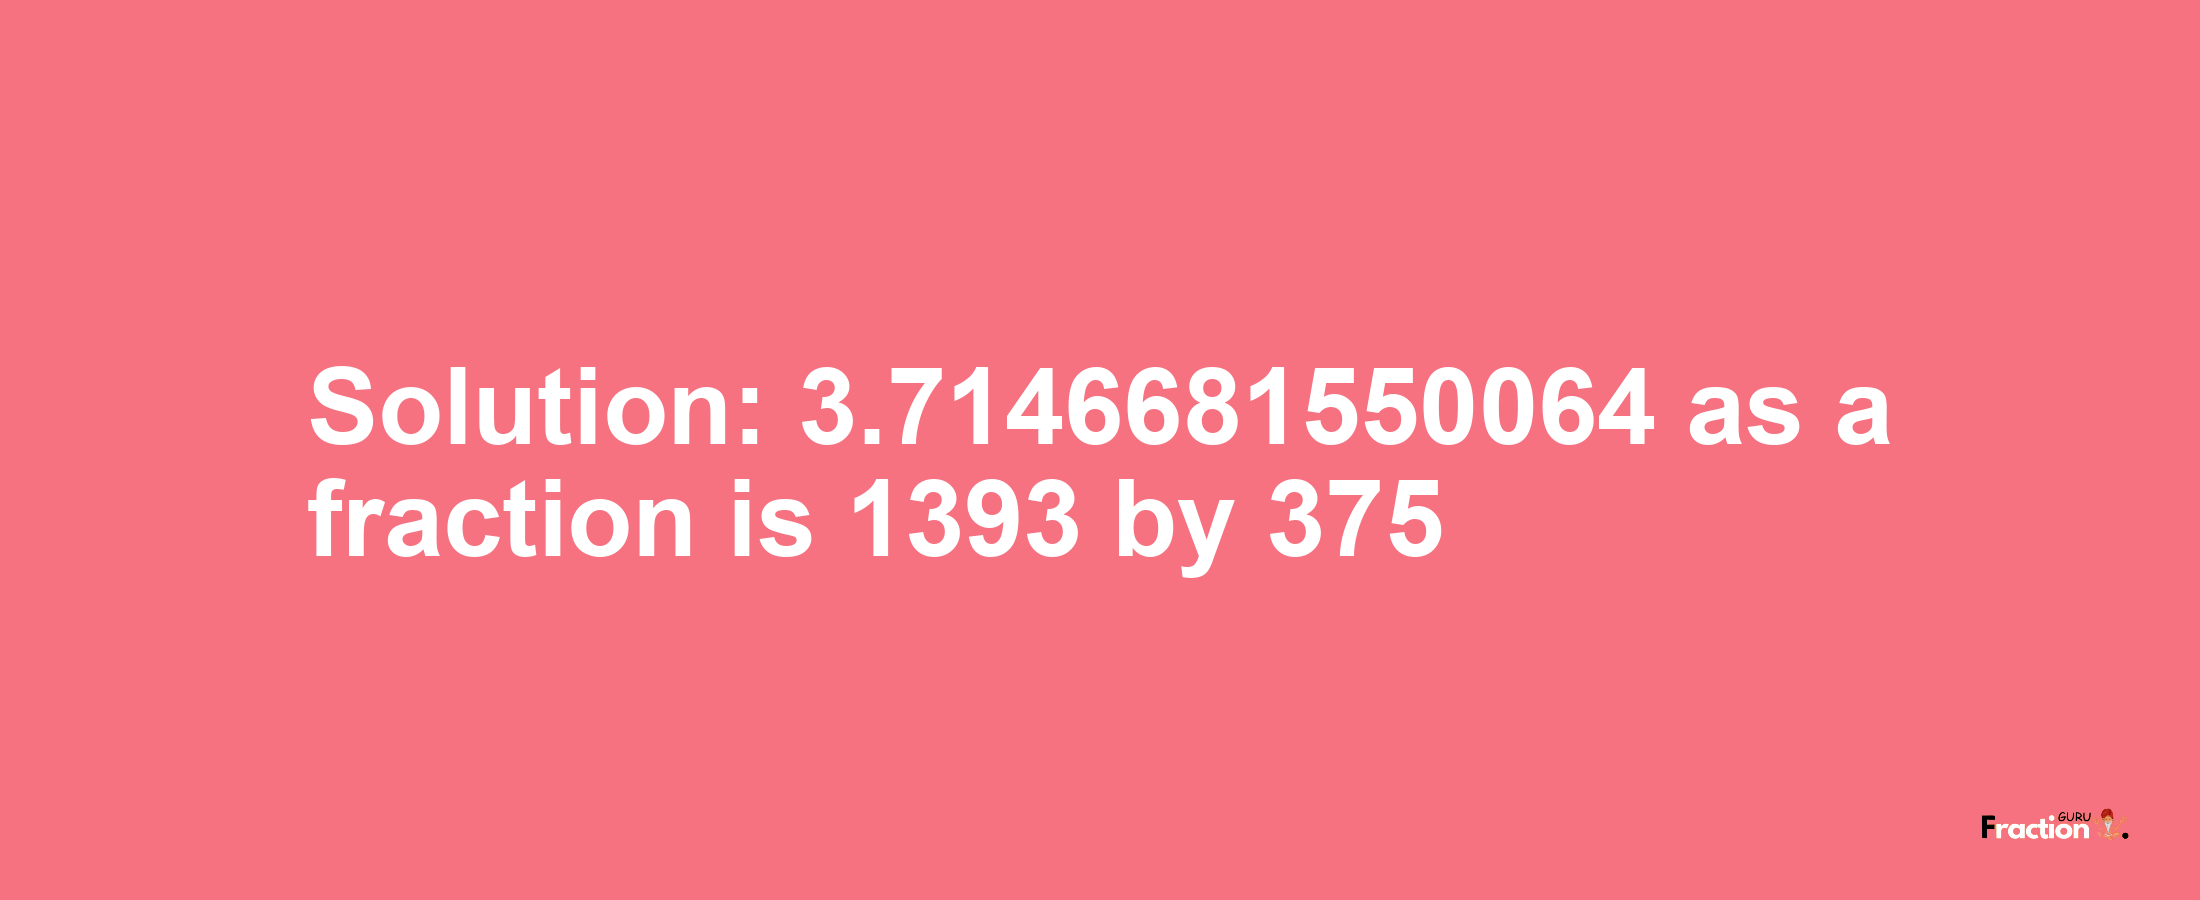 Solution:3.7146681550064 as a fraction is 1393/375